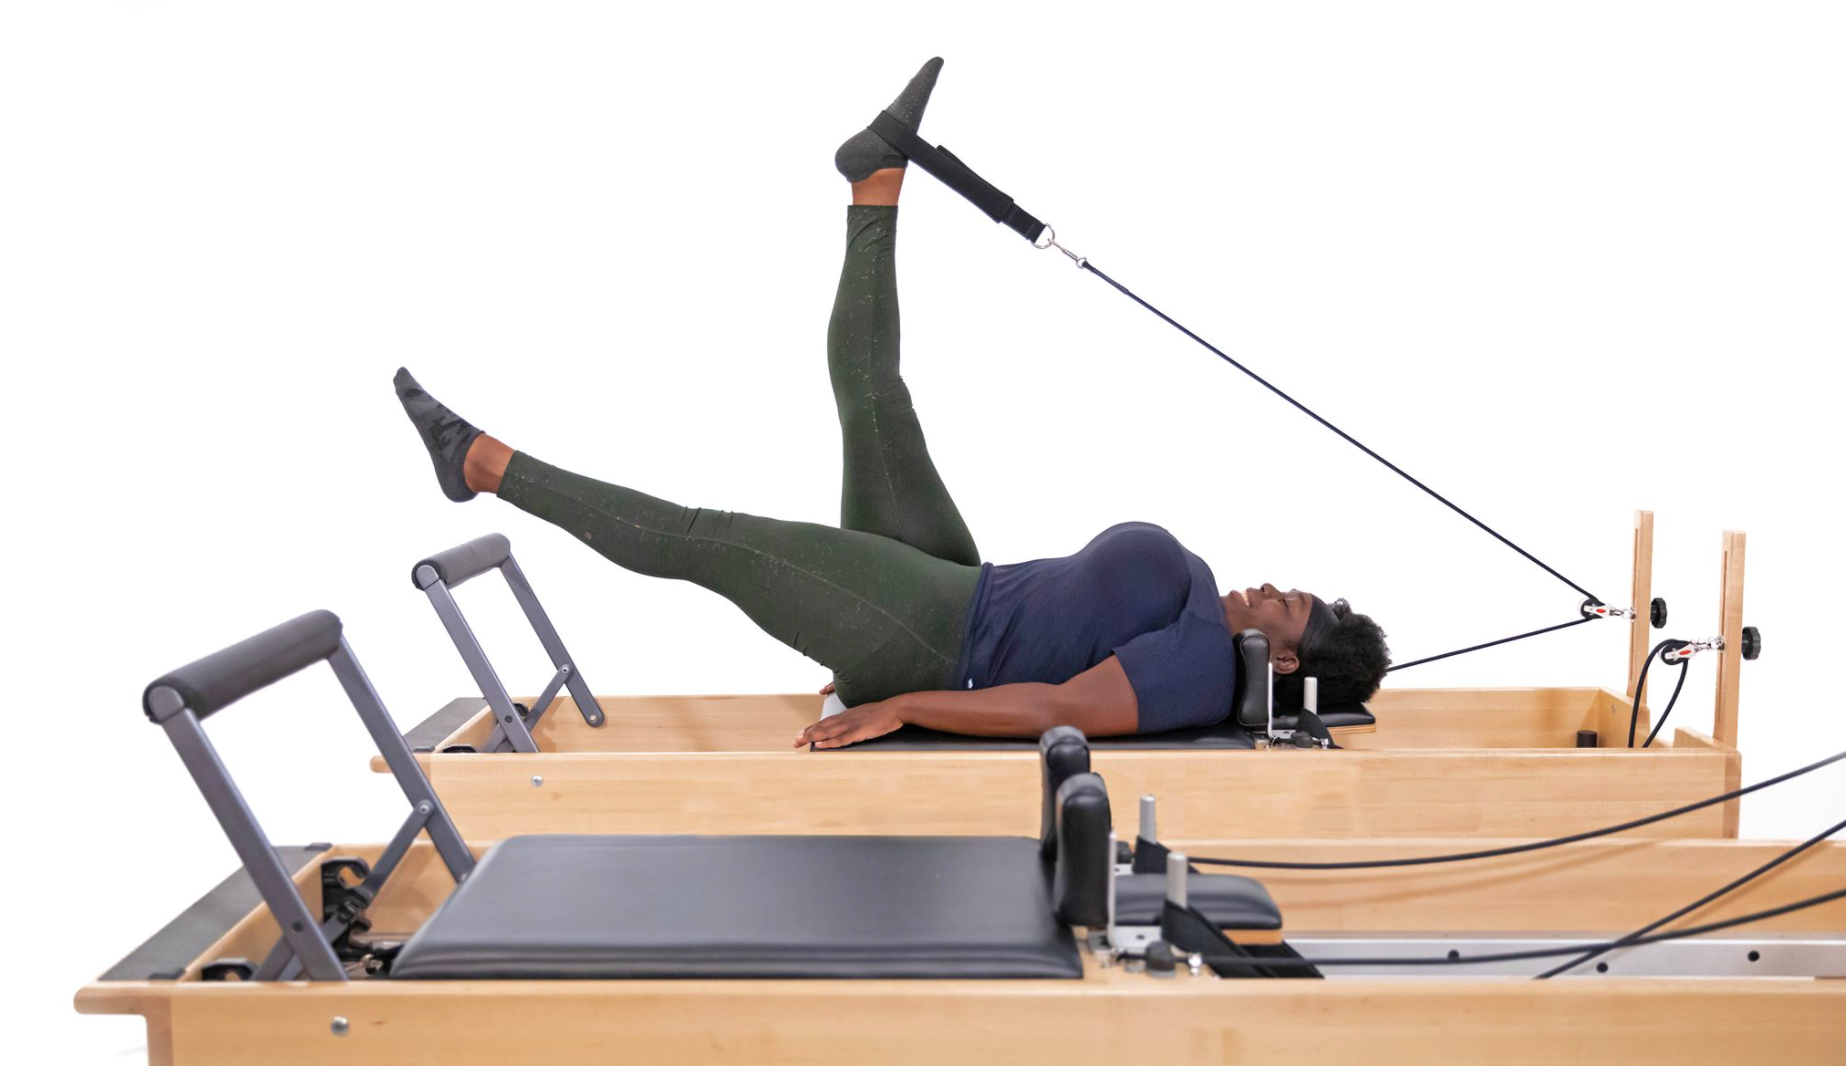 What’s a Pilates Machine and How do You Use One?